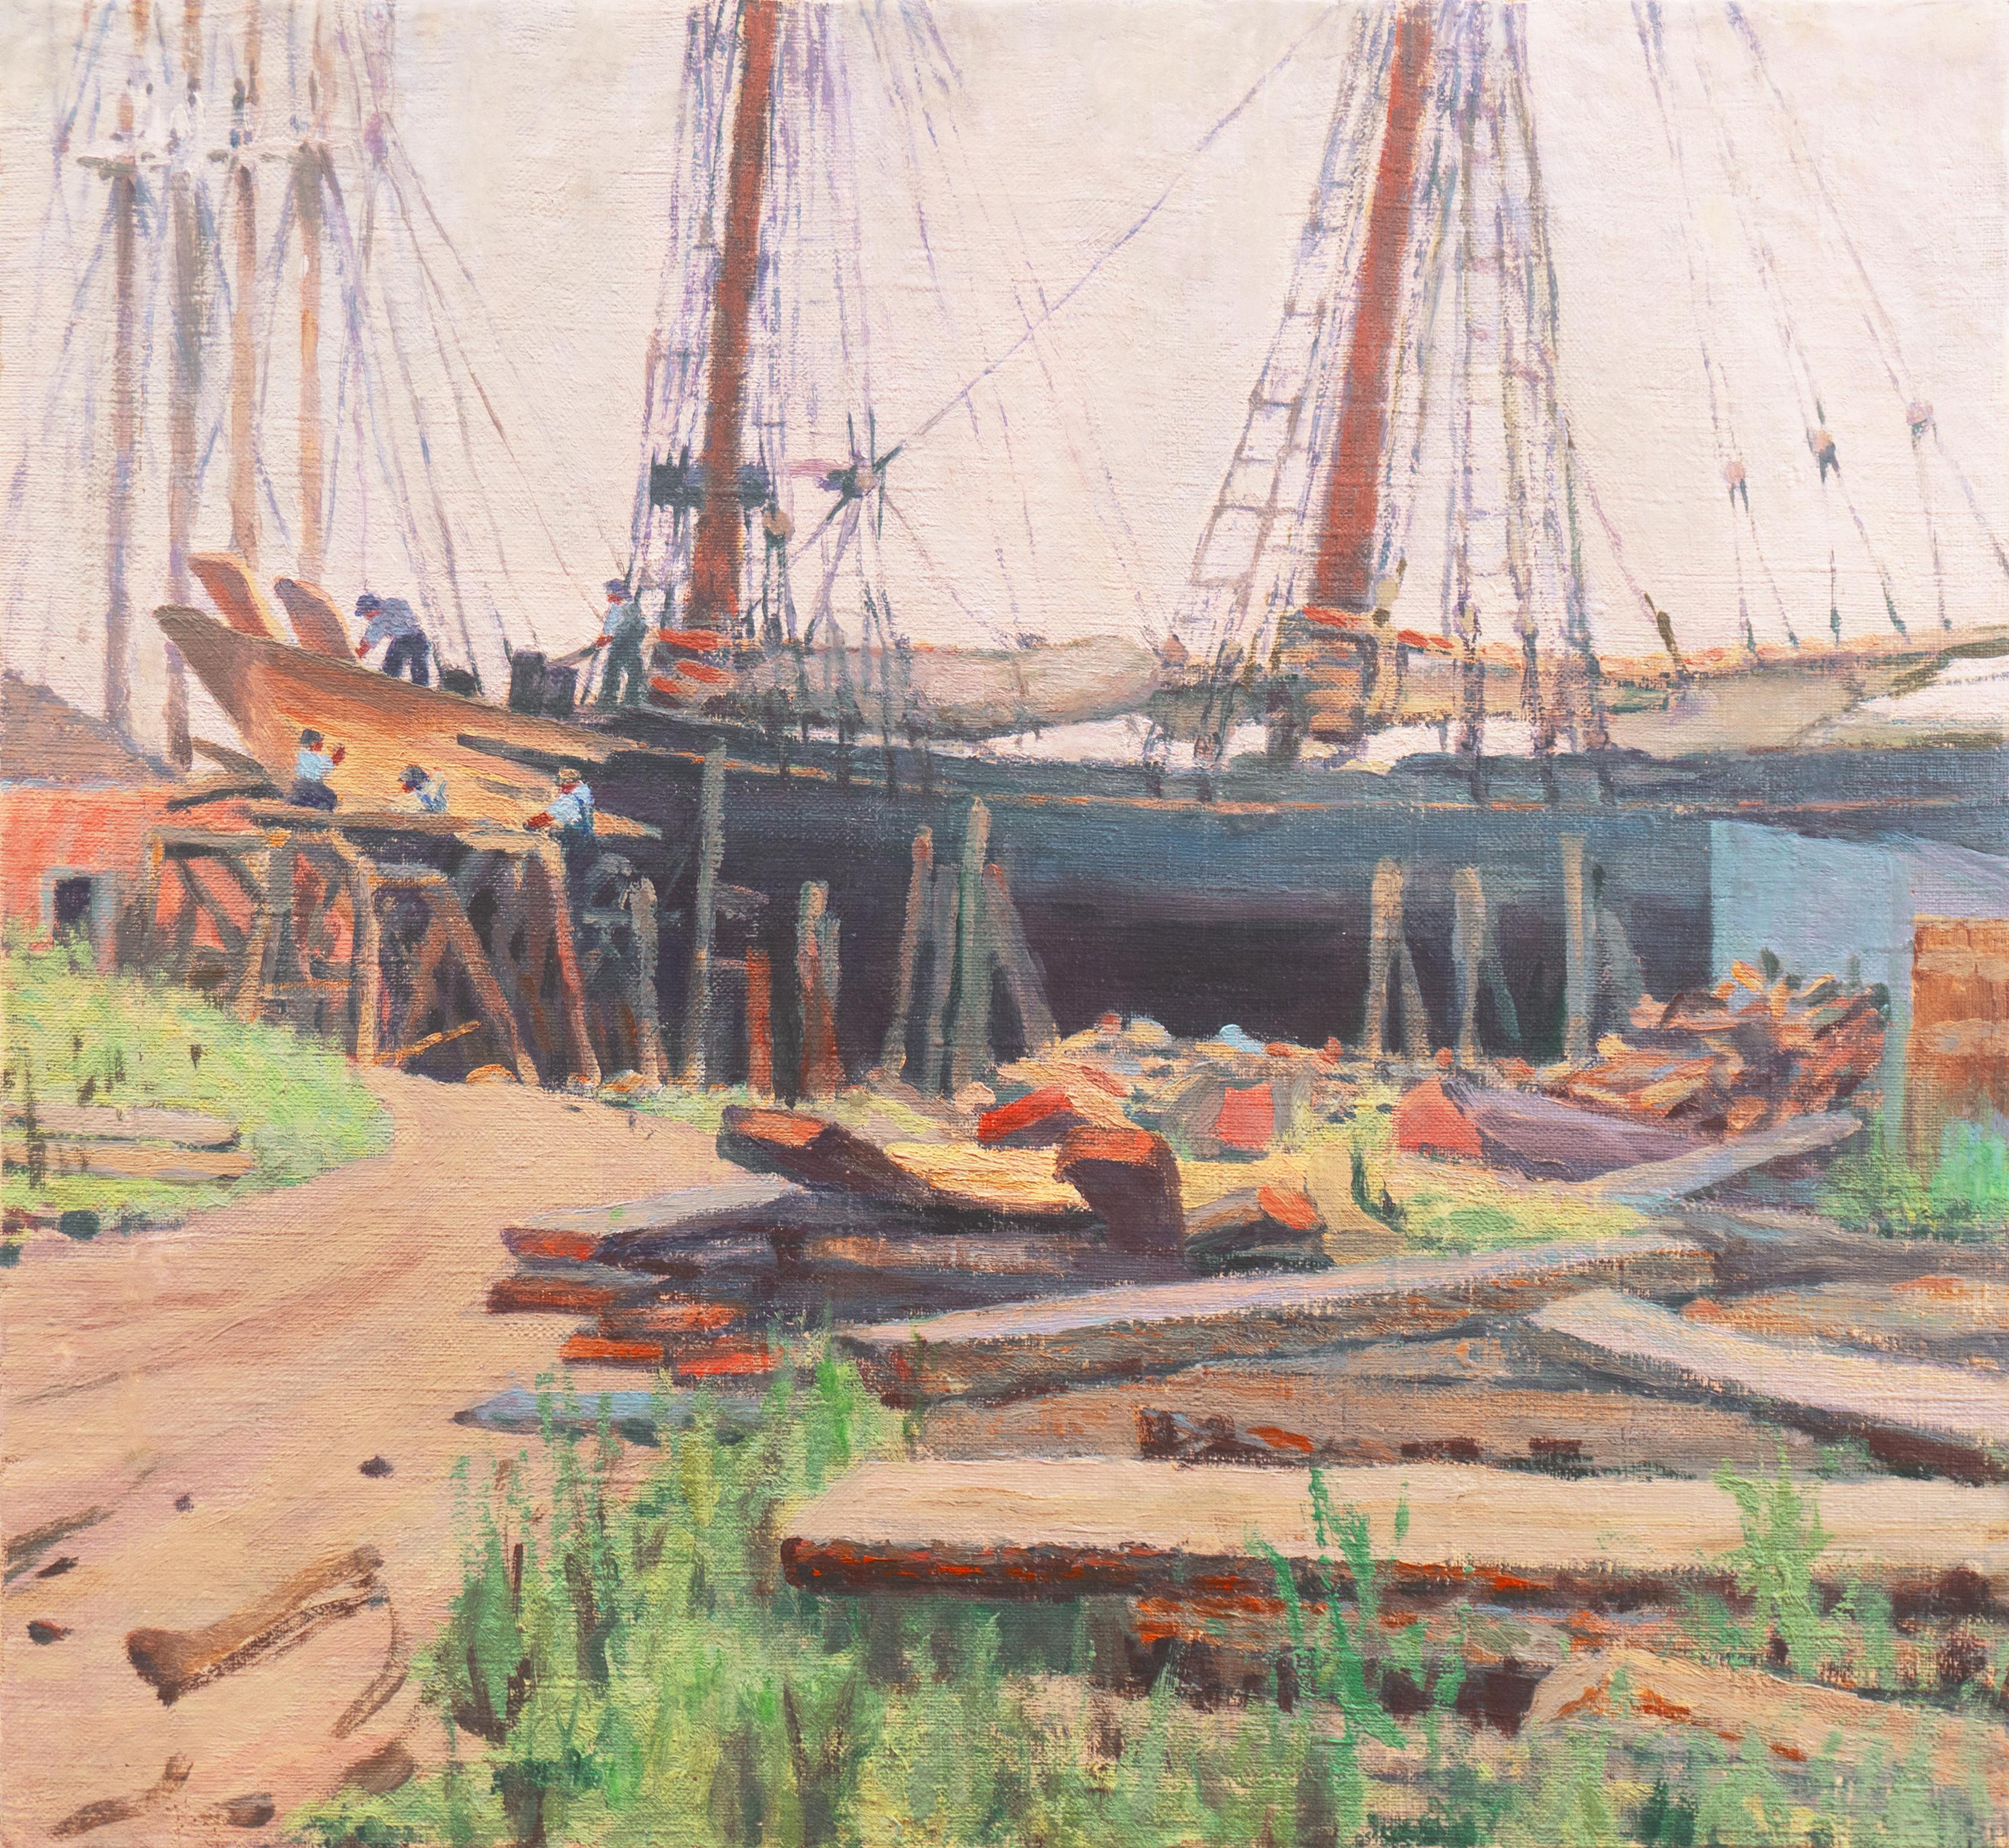 American School (20th century) Landscape Painting - 'When the Boats Were Made of Wood and the Men Were Made of Steel', Impressionist